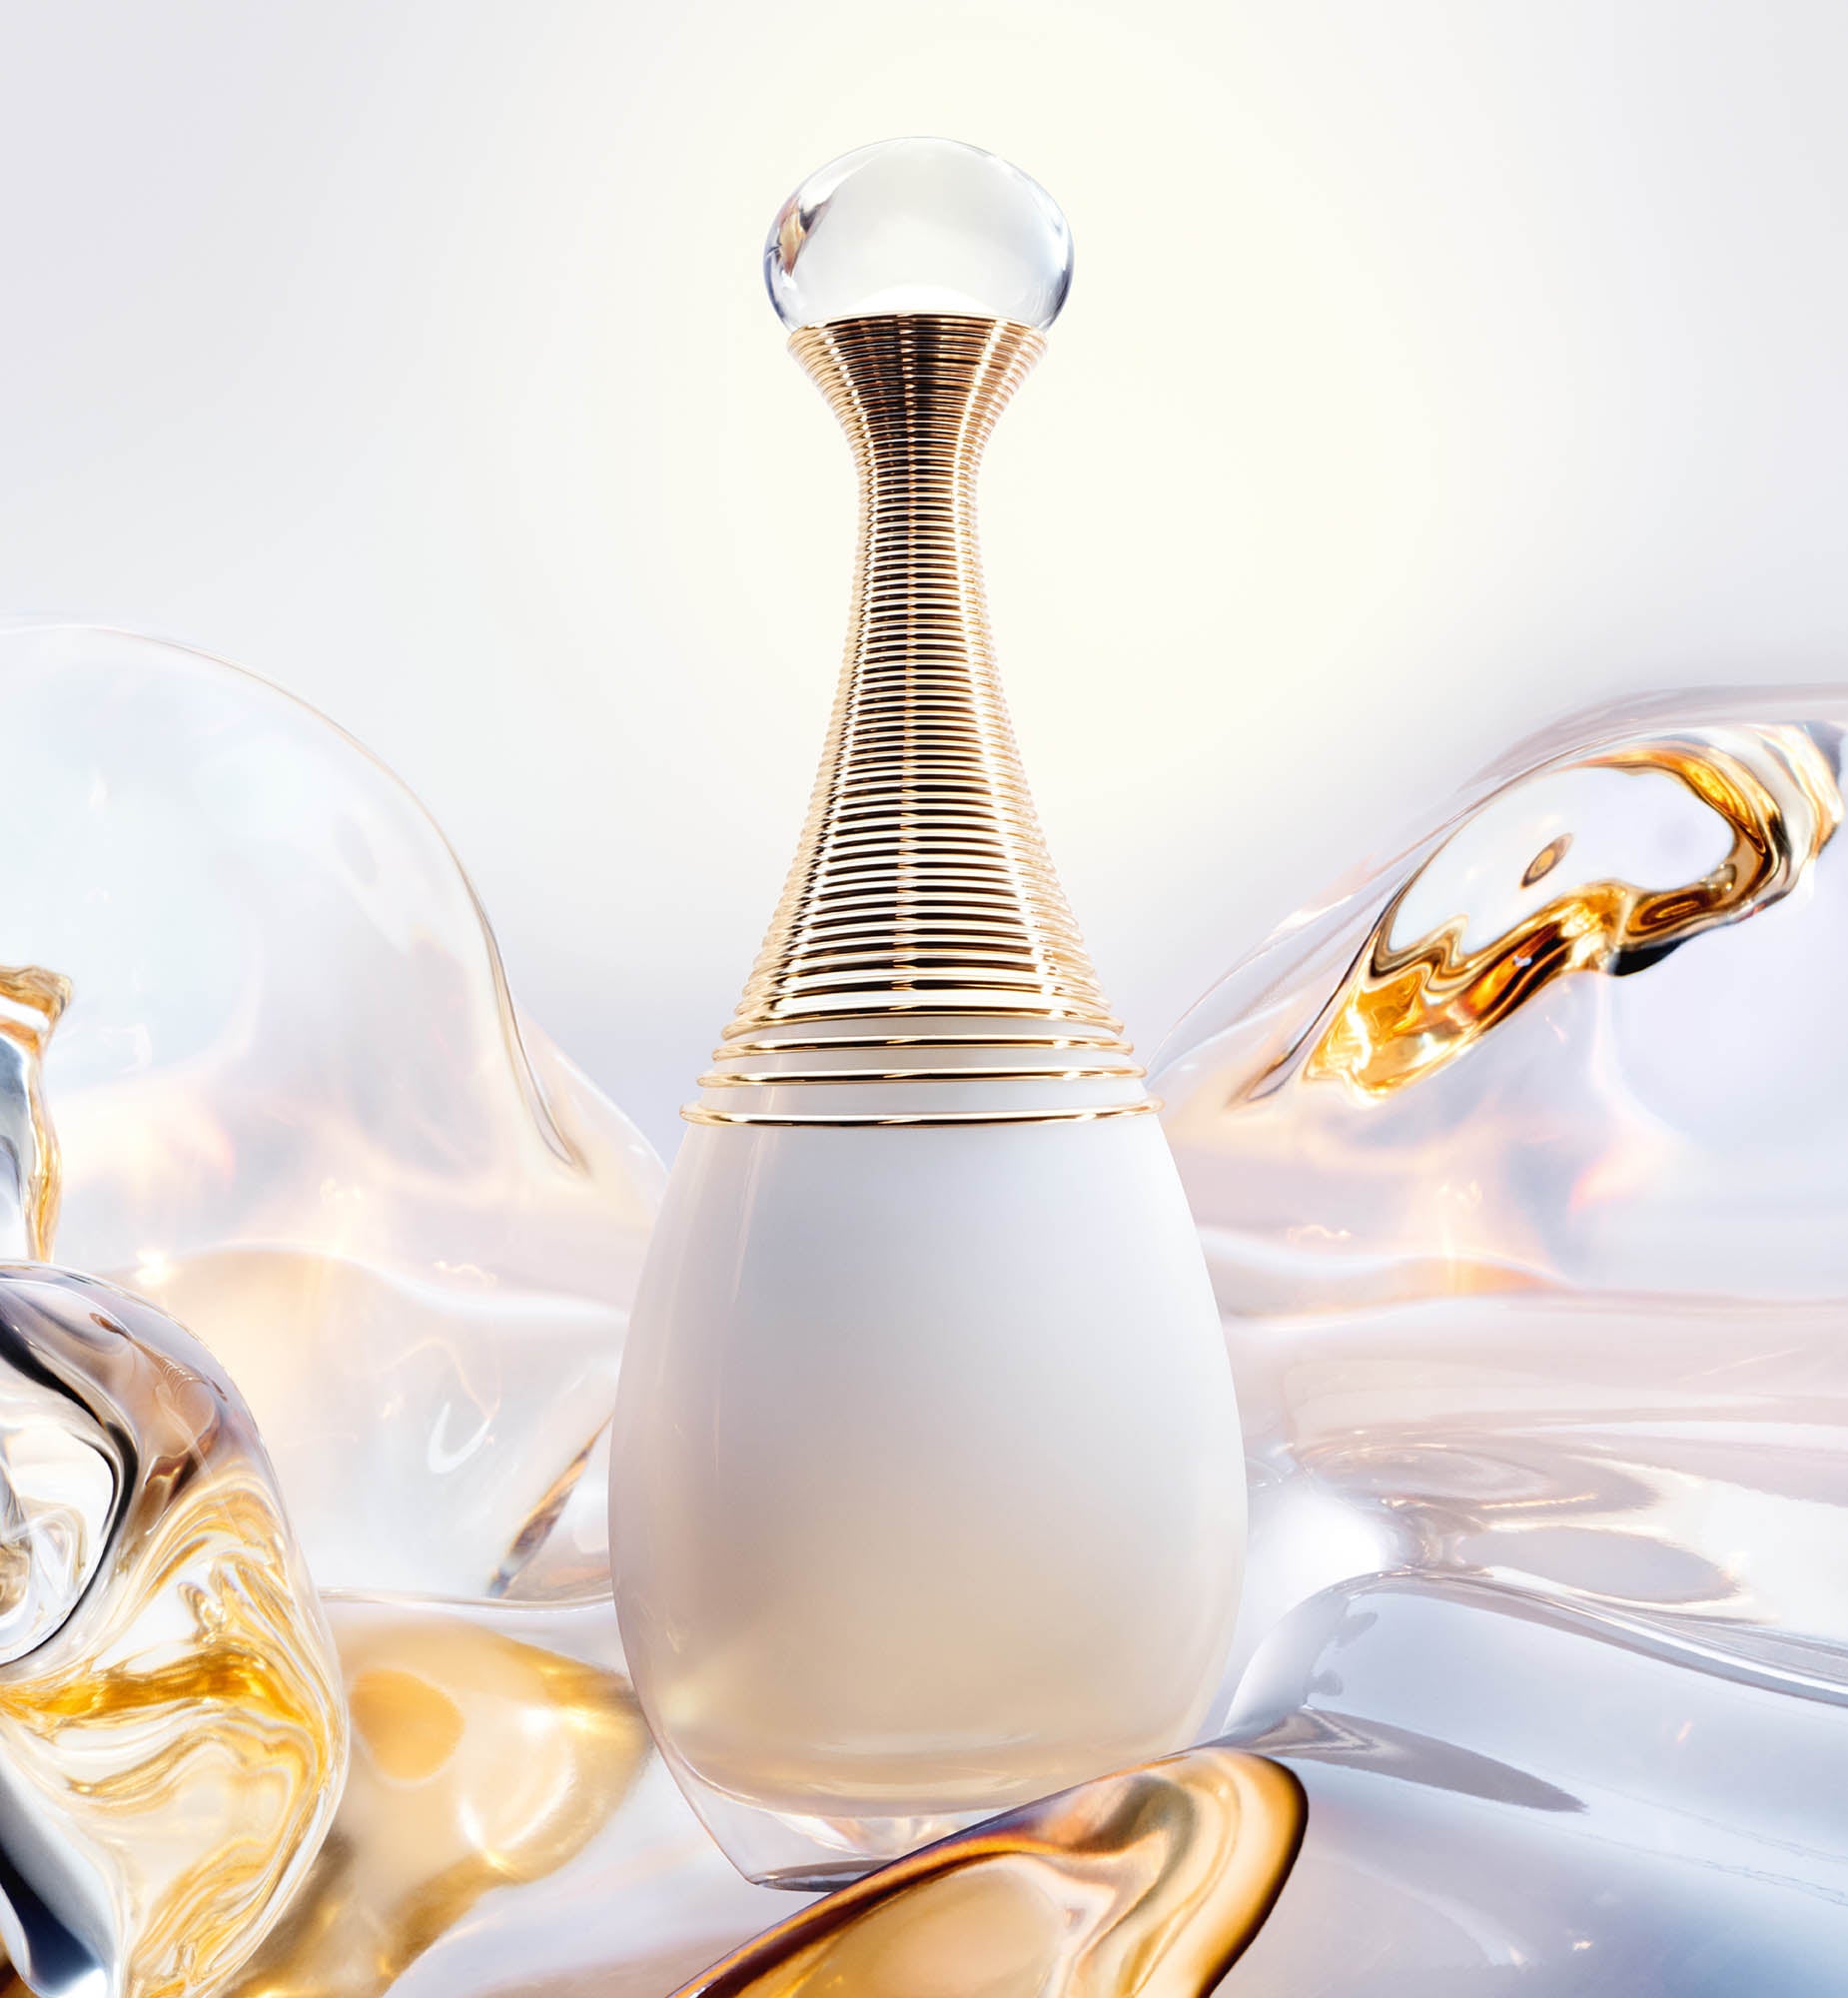 Discover L'Or de J'adore, the new fragrance by Francis Kurkdjian